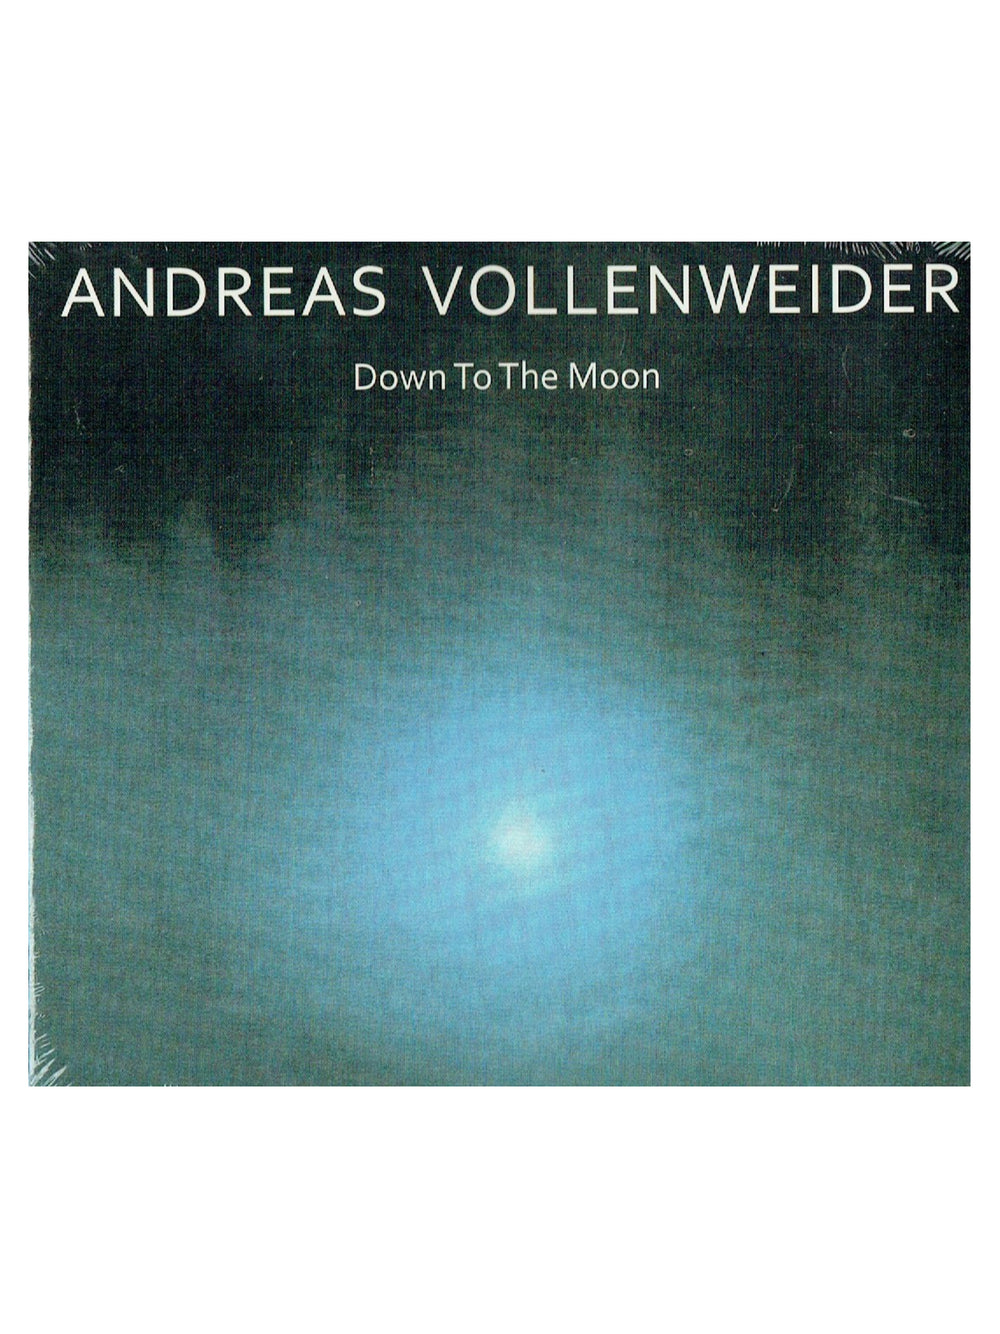 Andreas Vollenweider Down To The Moon CD Album Brand New Sealed Lovesexy Prince